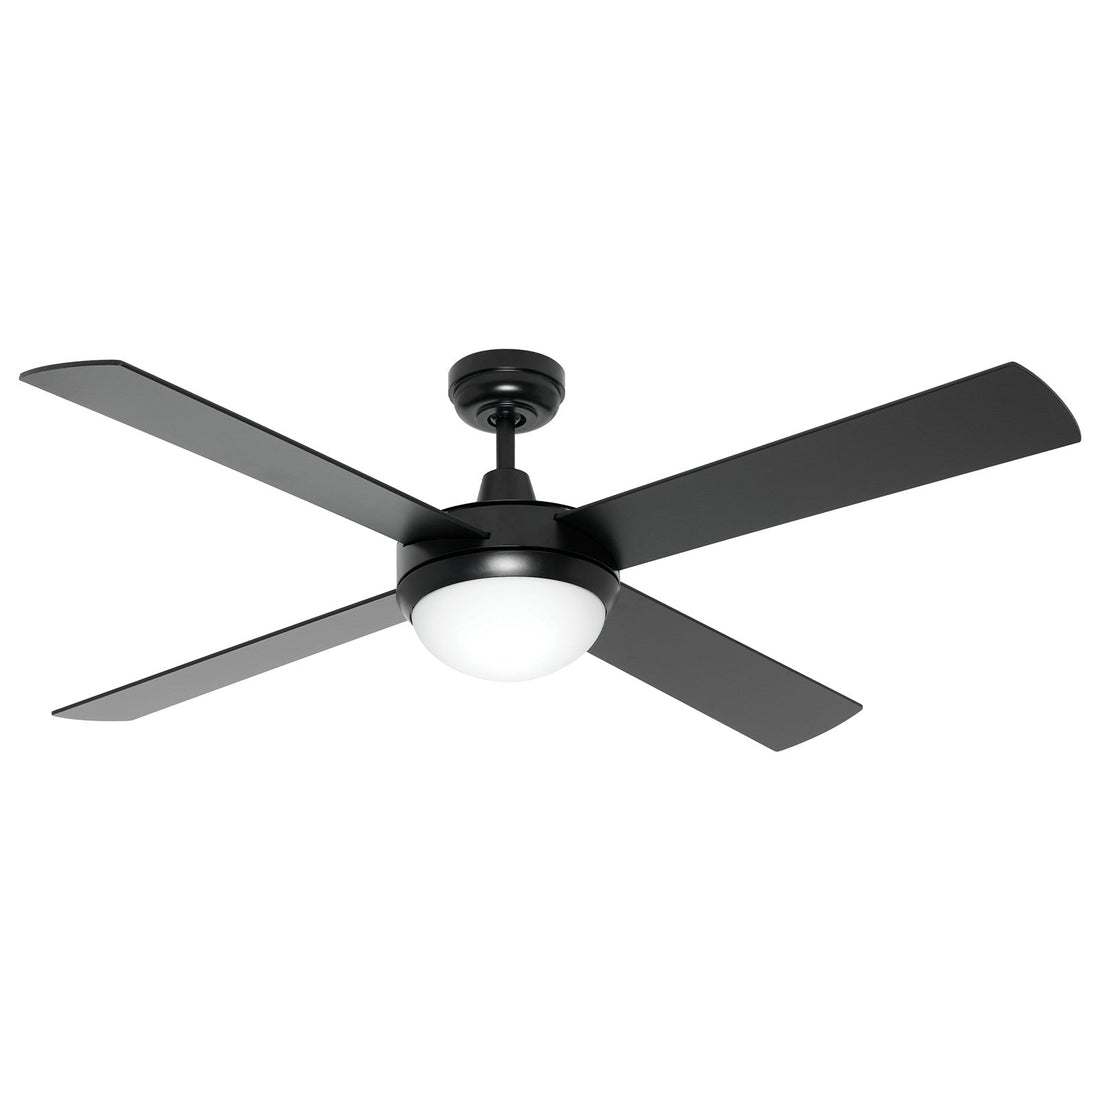 Caprice AC 1.3m AC Ceiling Fan with Light Mercator